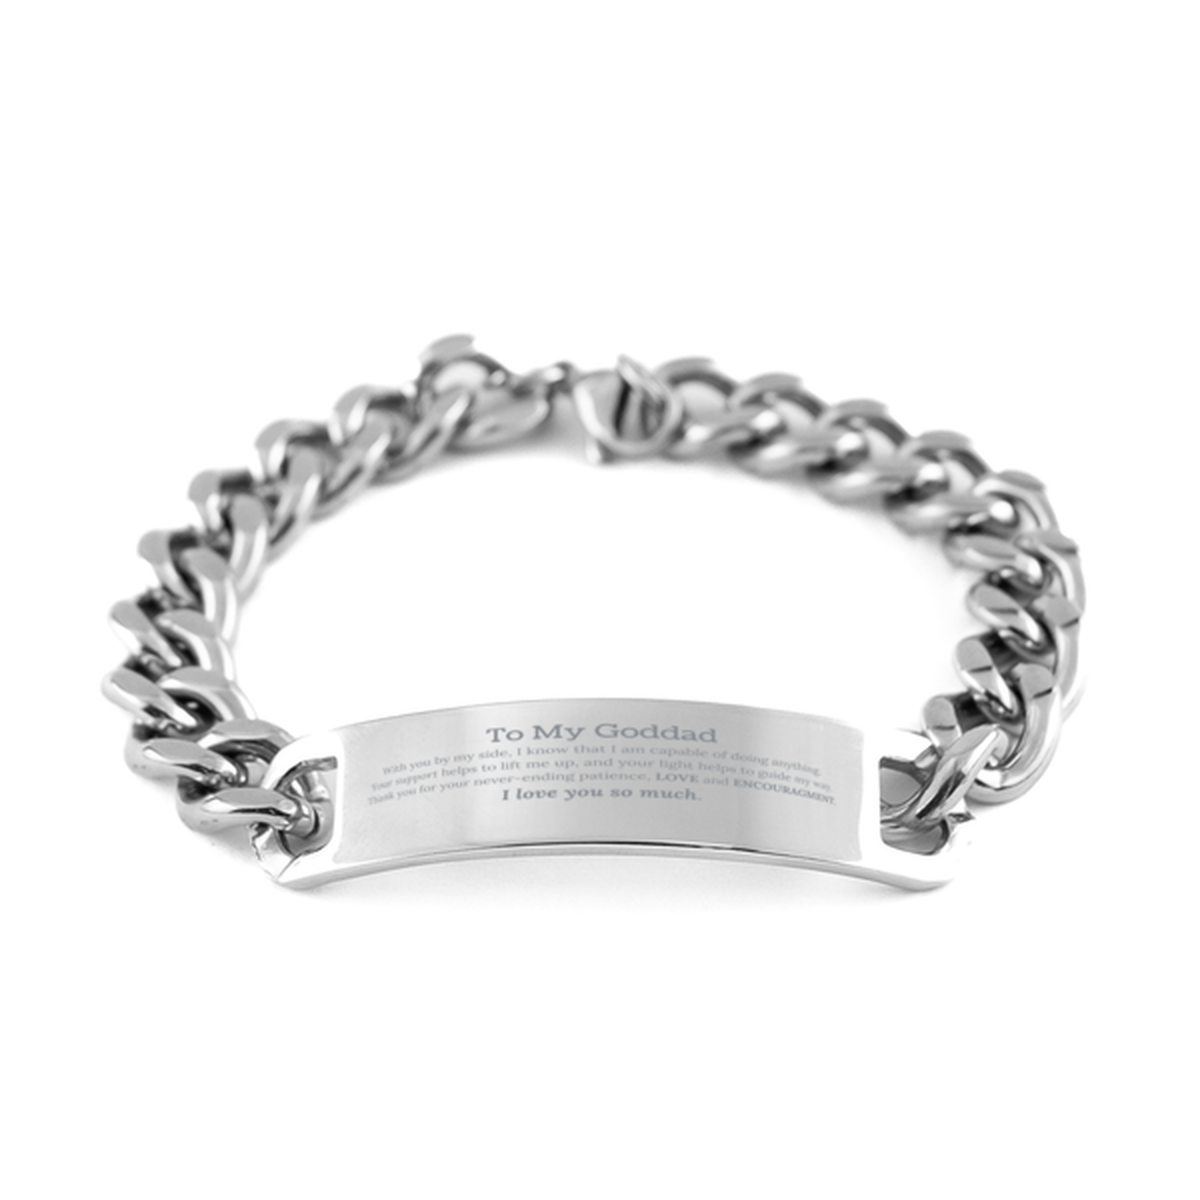 Appreciation Goddad Cuban Chain Stainless Steel Bracelet Gifts, To My Goddad Birthday Christmas Wedding Keepsake Gifts for Goddad With you by my side, I know that I am capable of doing anything. I love you so much